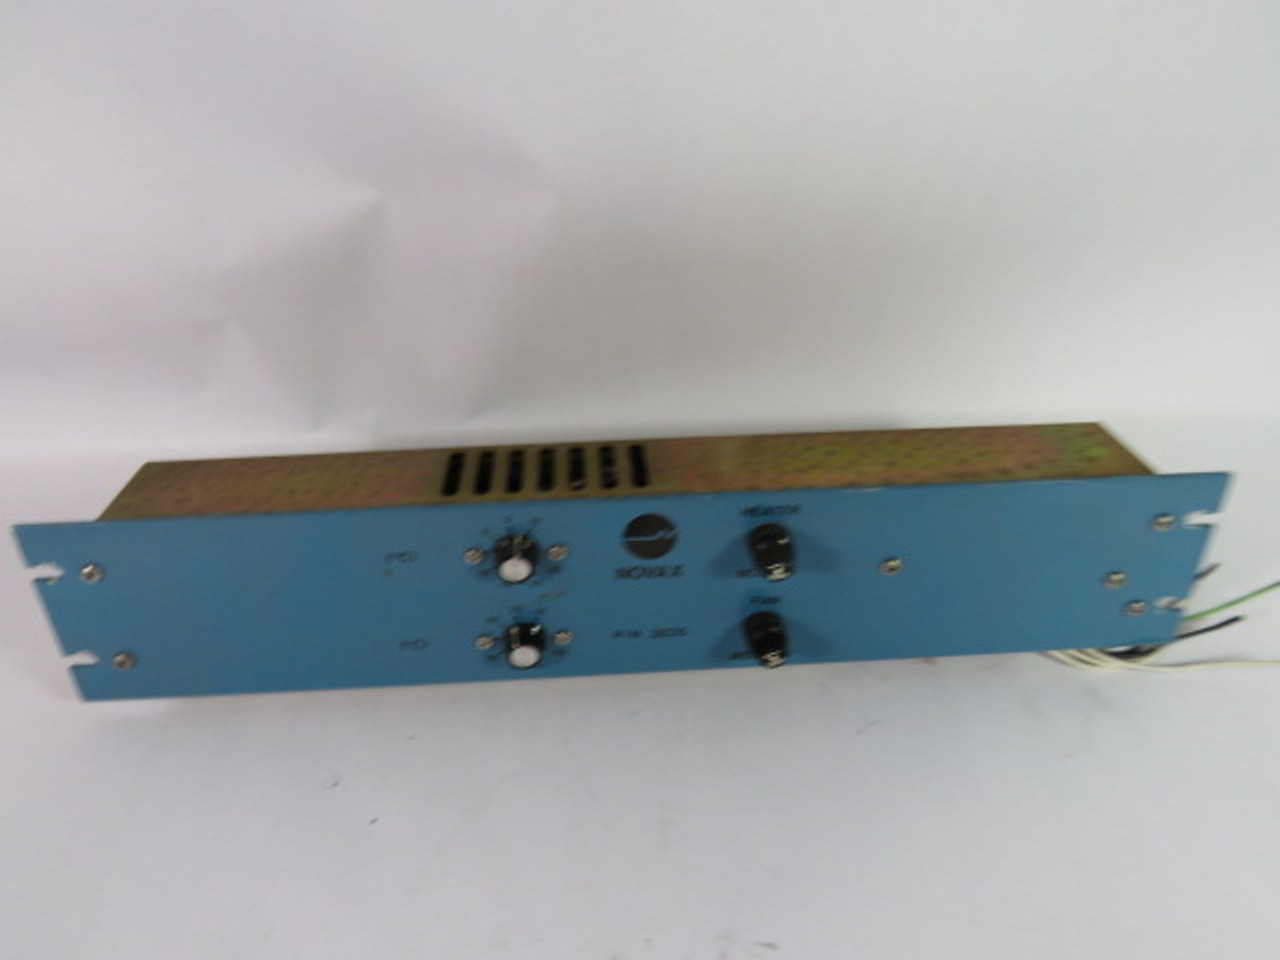 Novax 3835 Control Panel for Industrial Heater and Fan USED